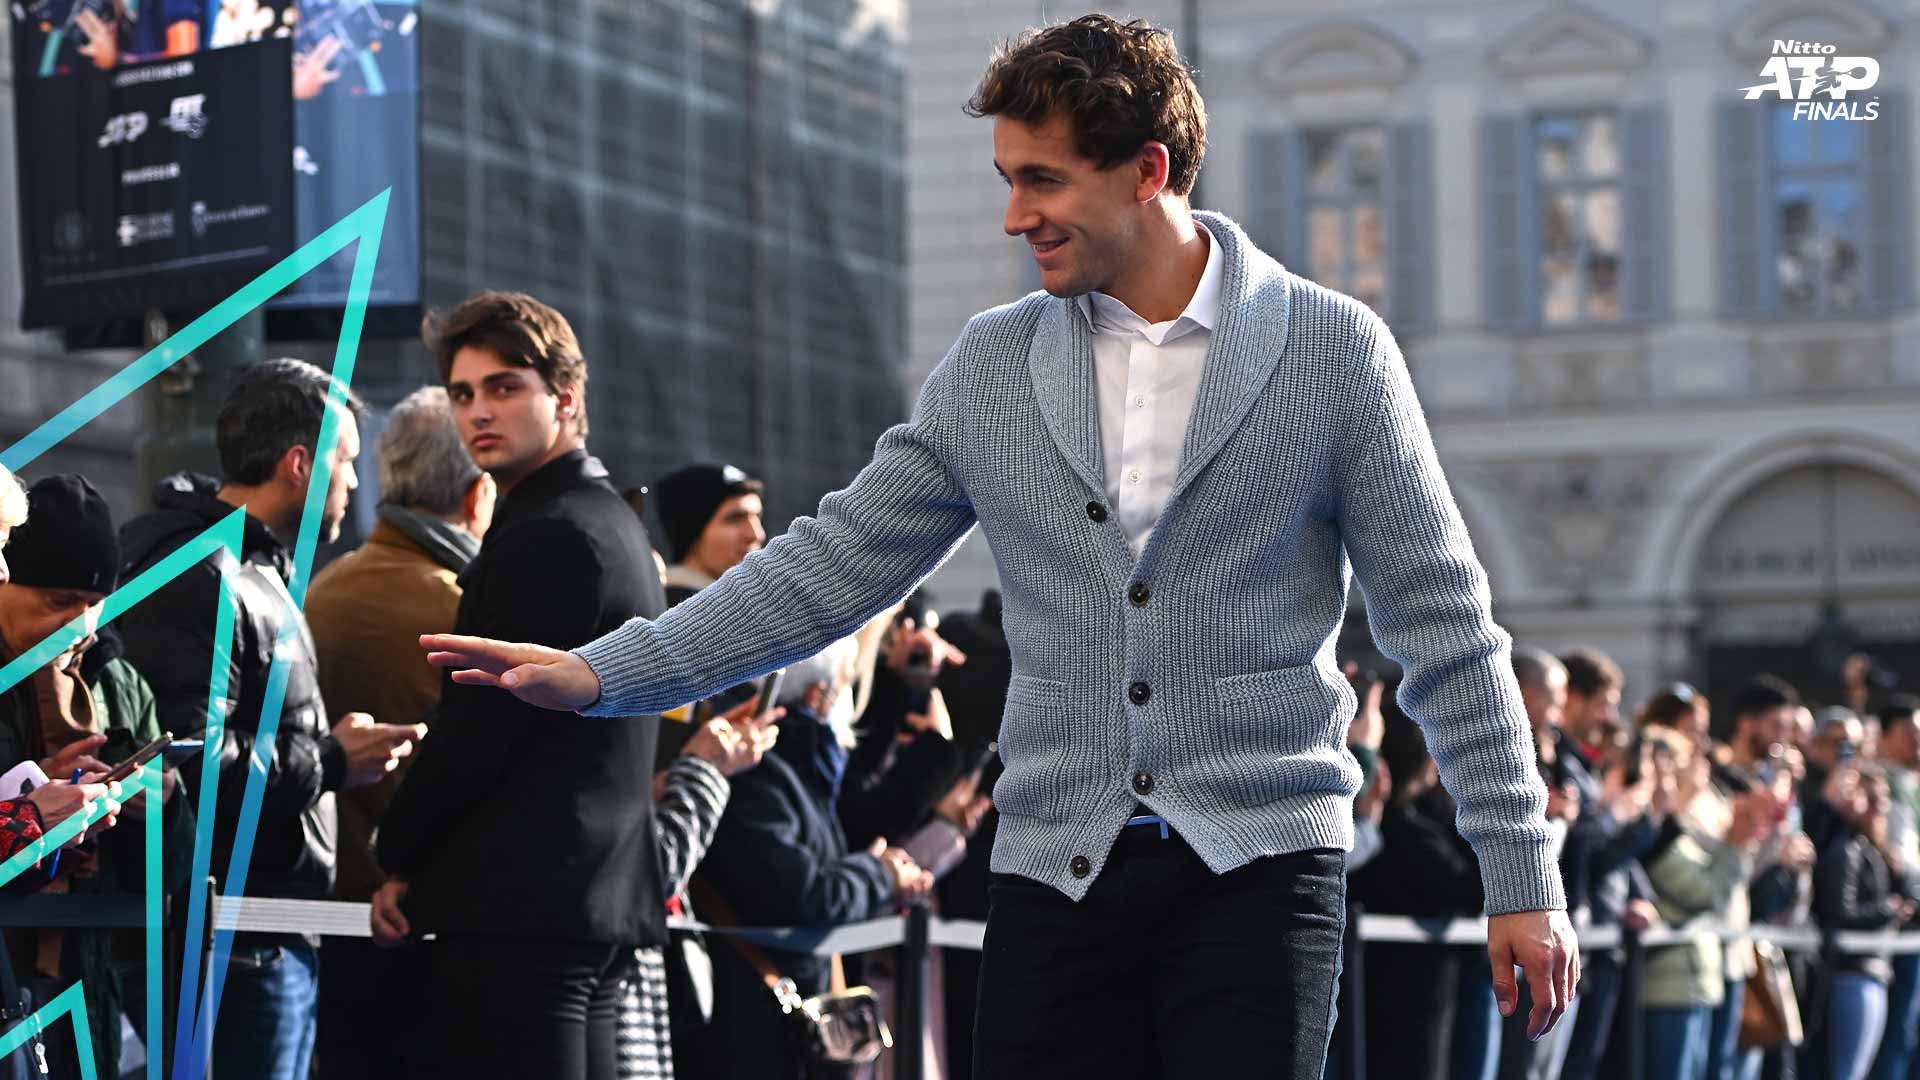 Casper Ruud greets fans on Friday at Turin's Piazza San Carlo.